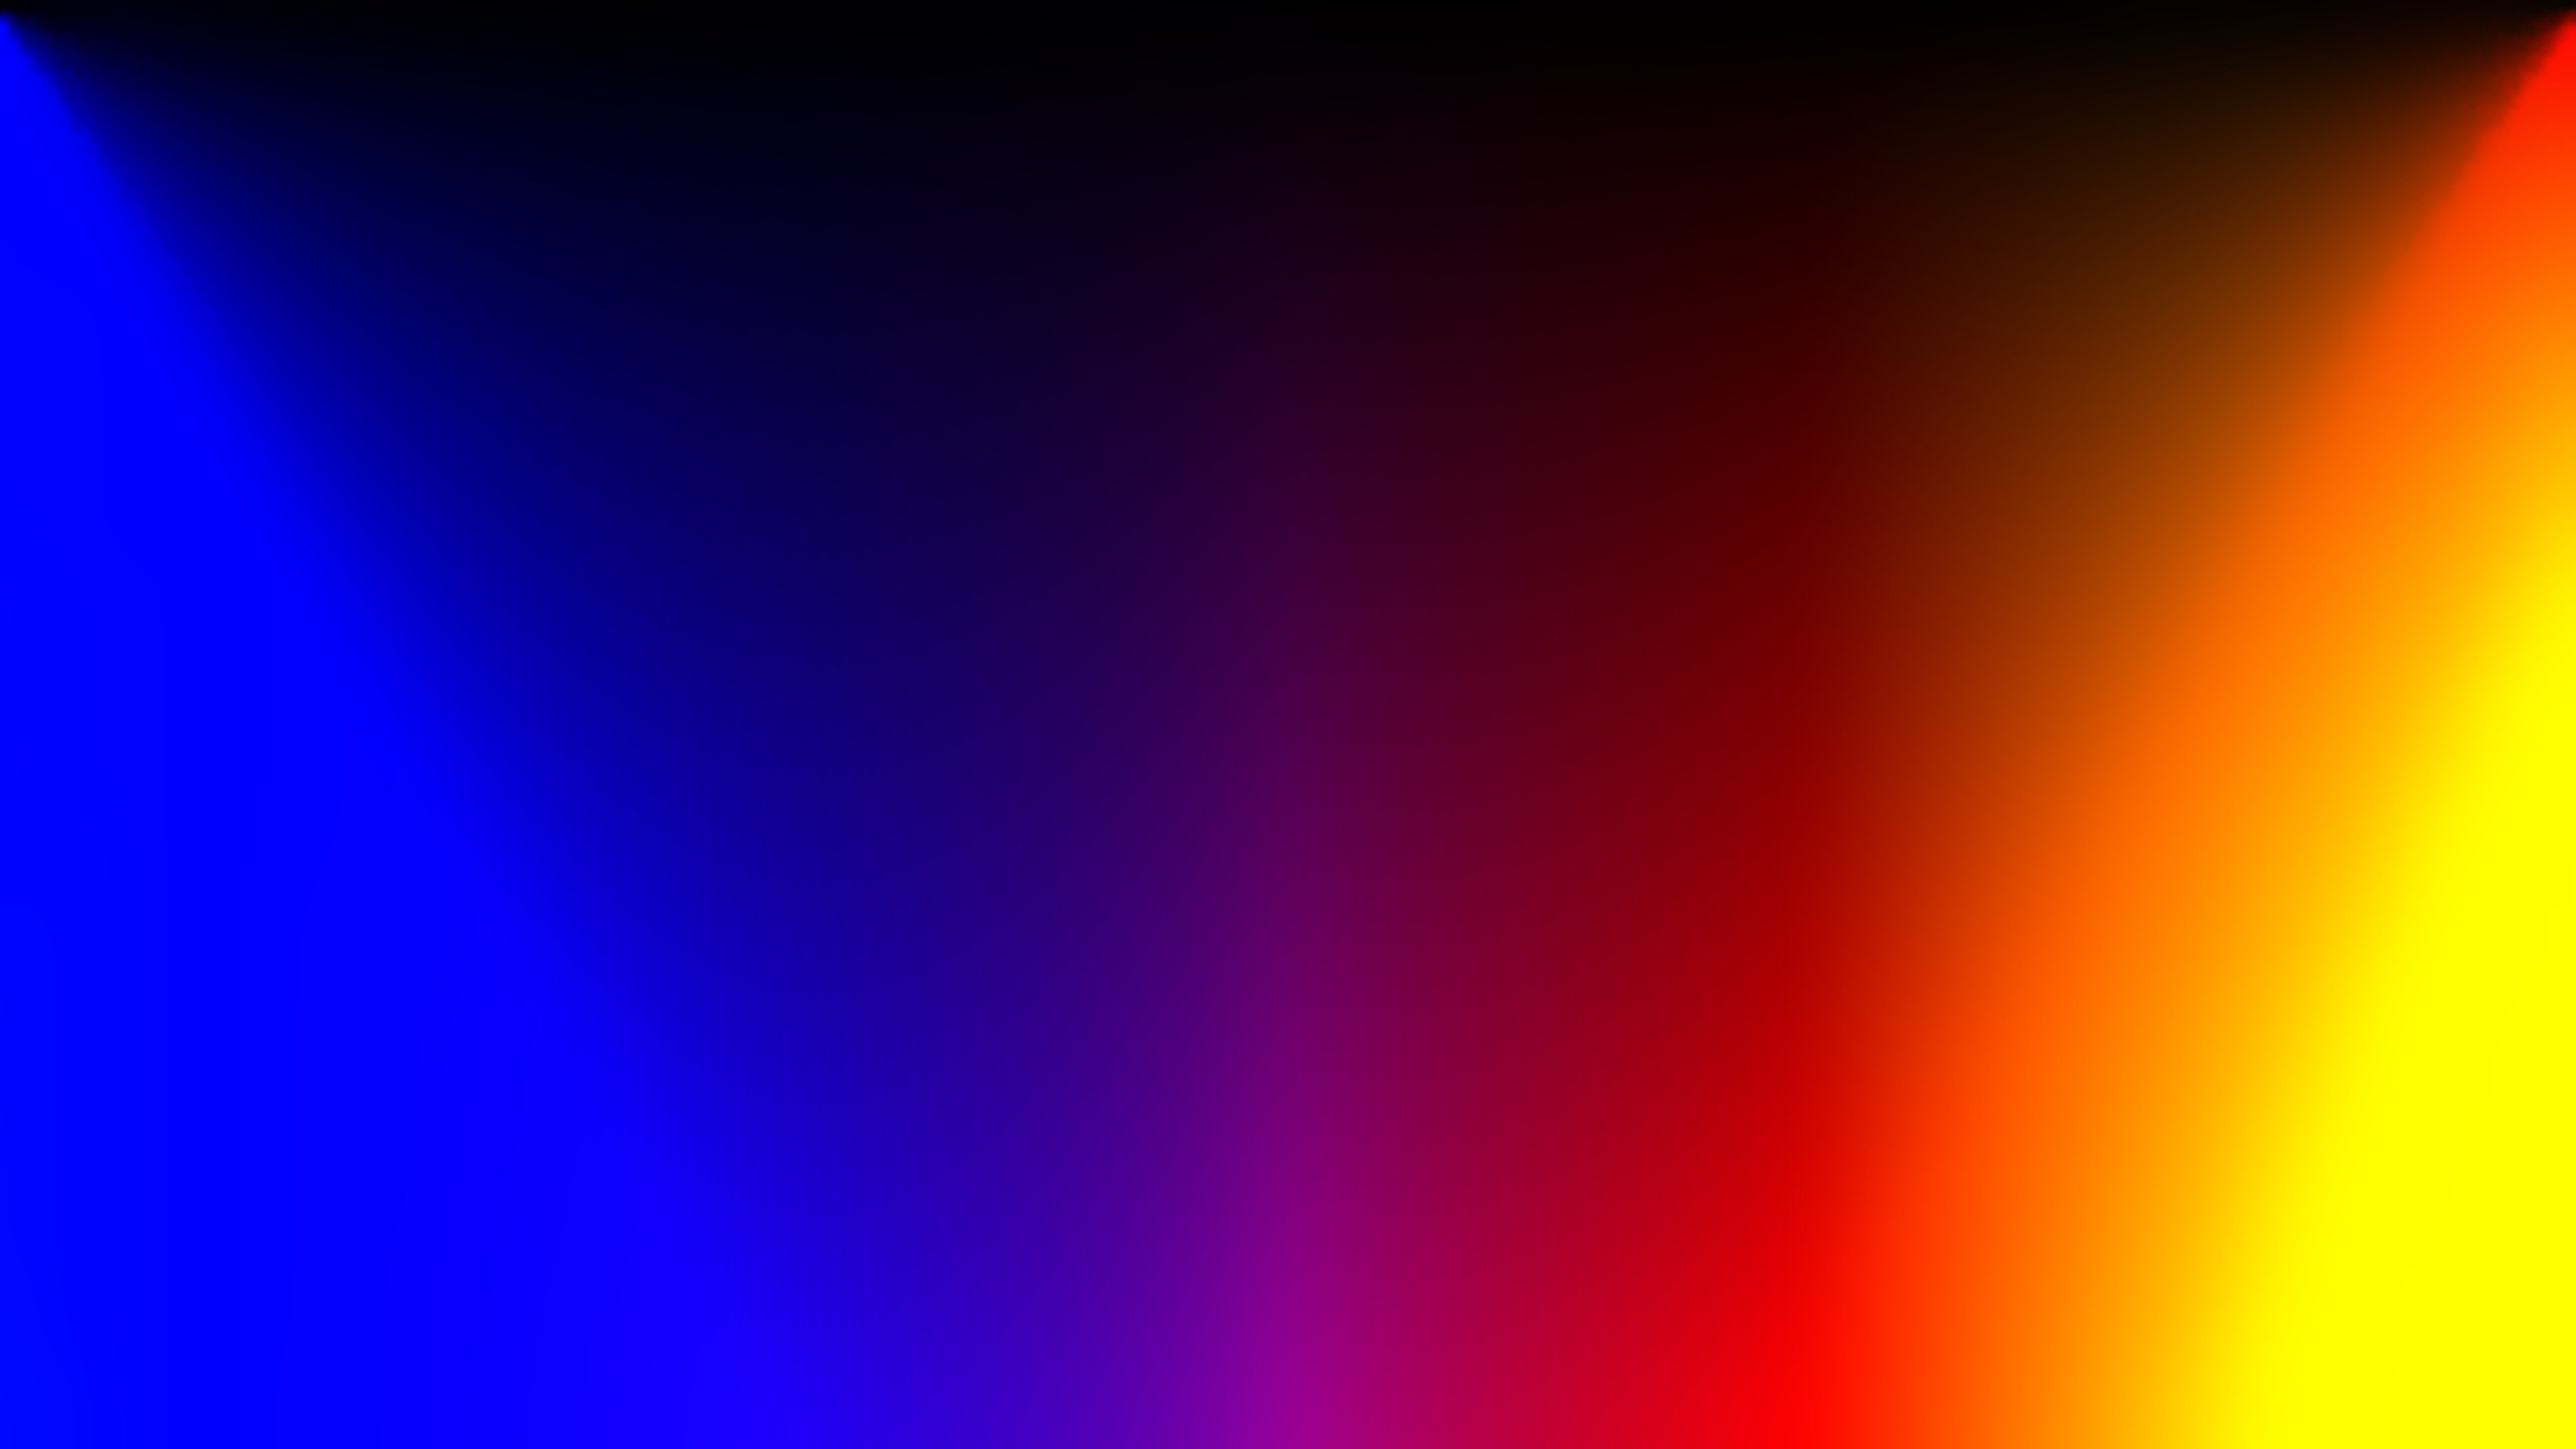 3840x2160 ... colors colorful abstract blue purple red orange yellow wallpaper ...